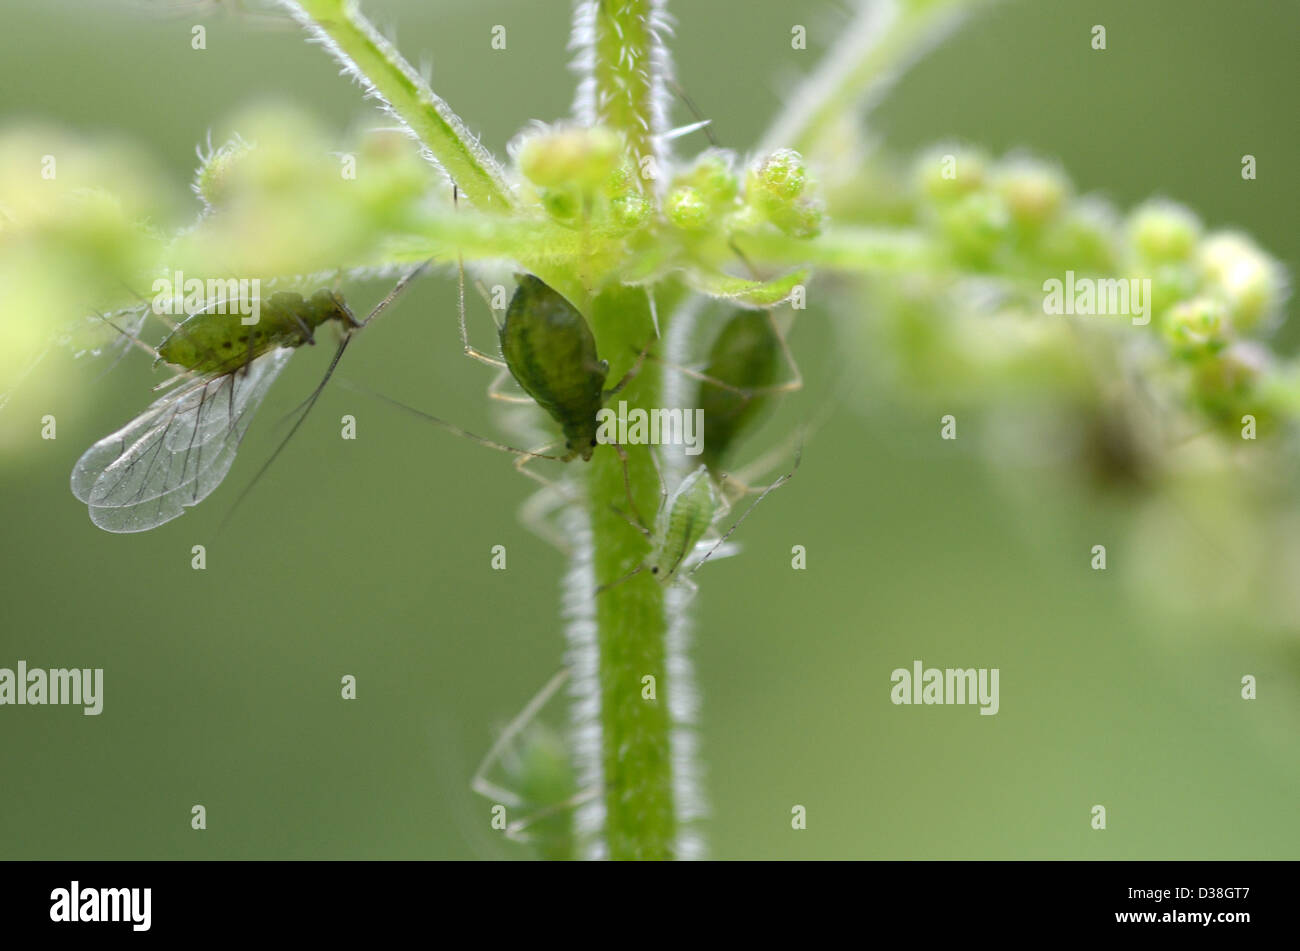 Greenfly on stem of plant, Aphids, garden pest, Stock Photo